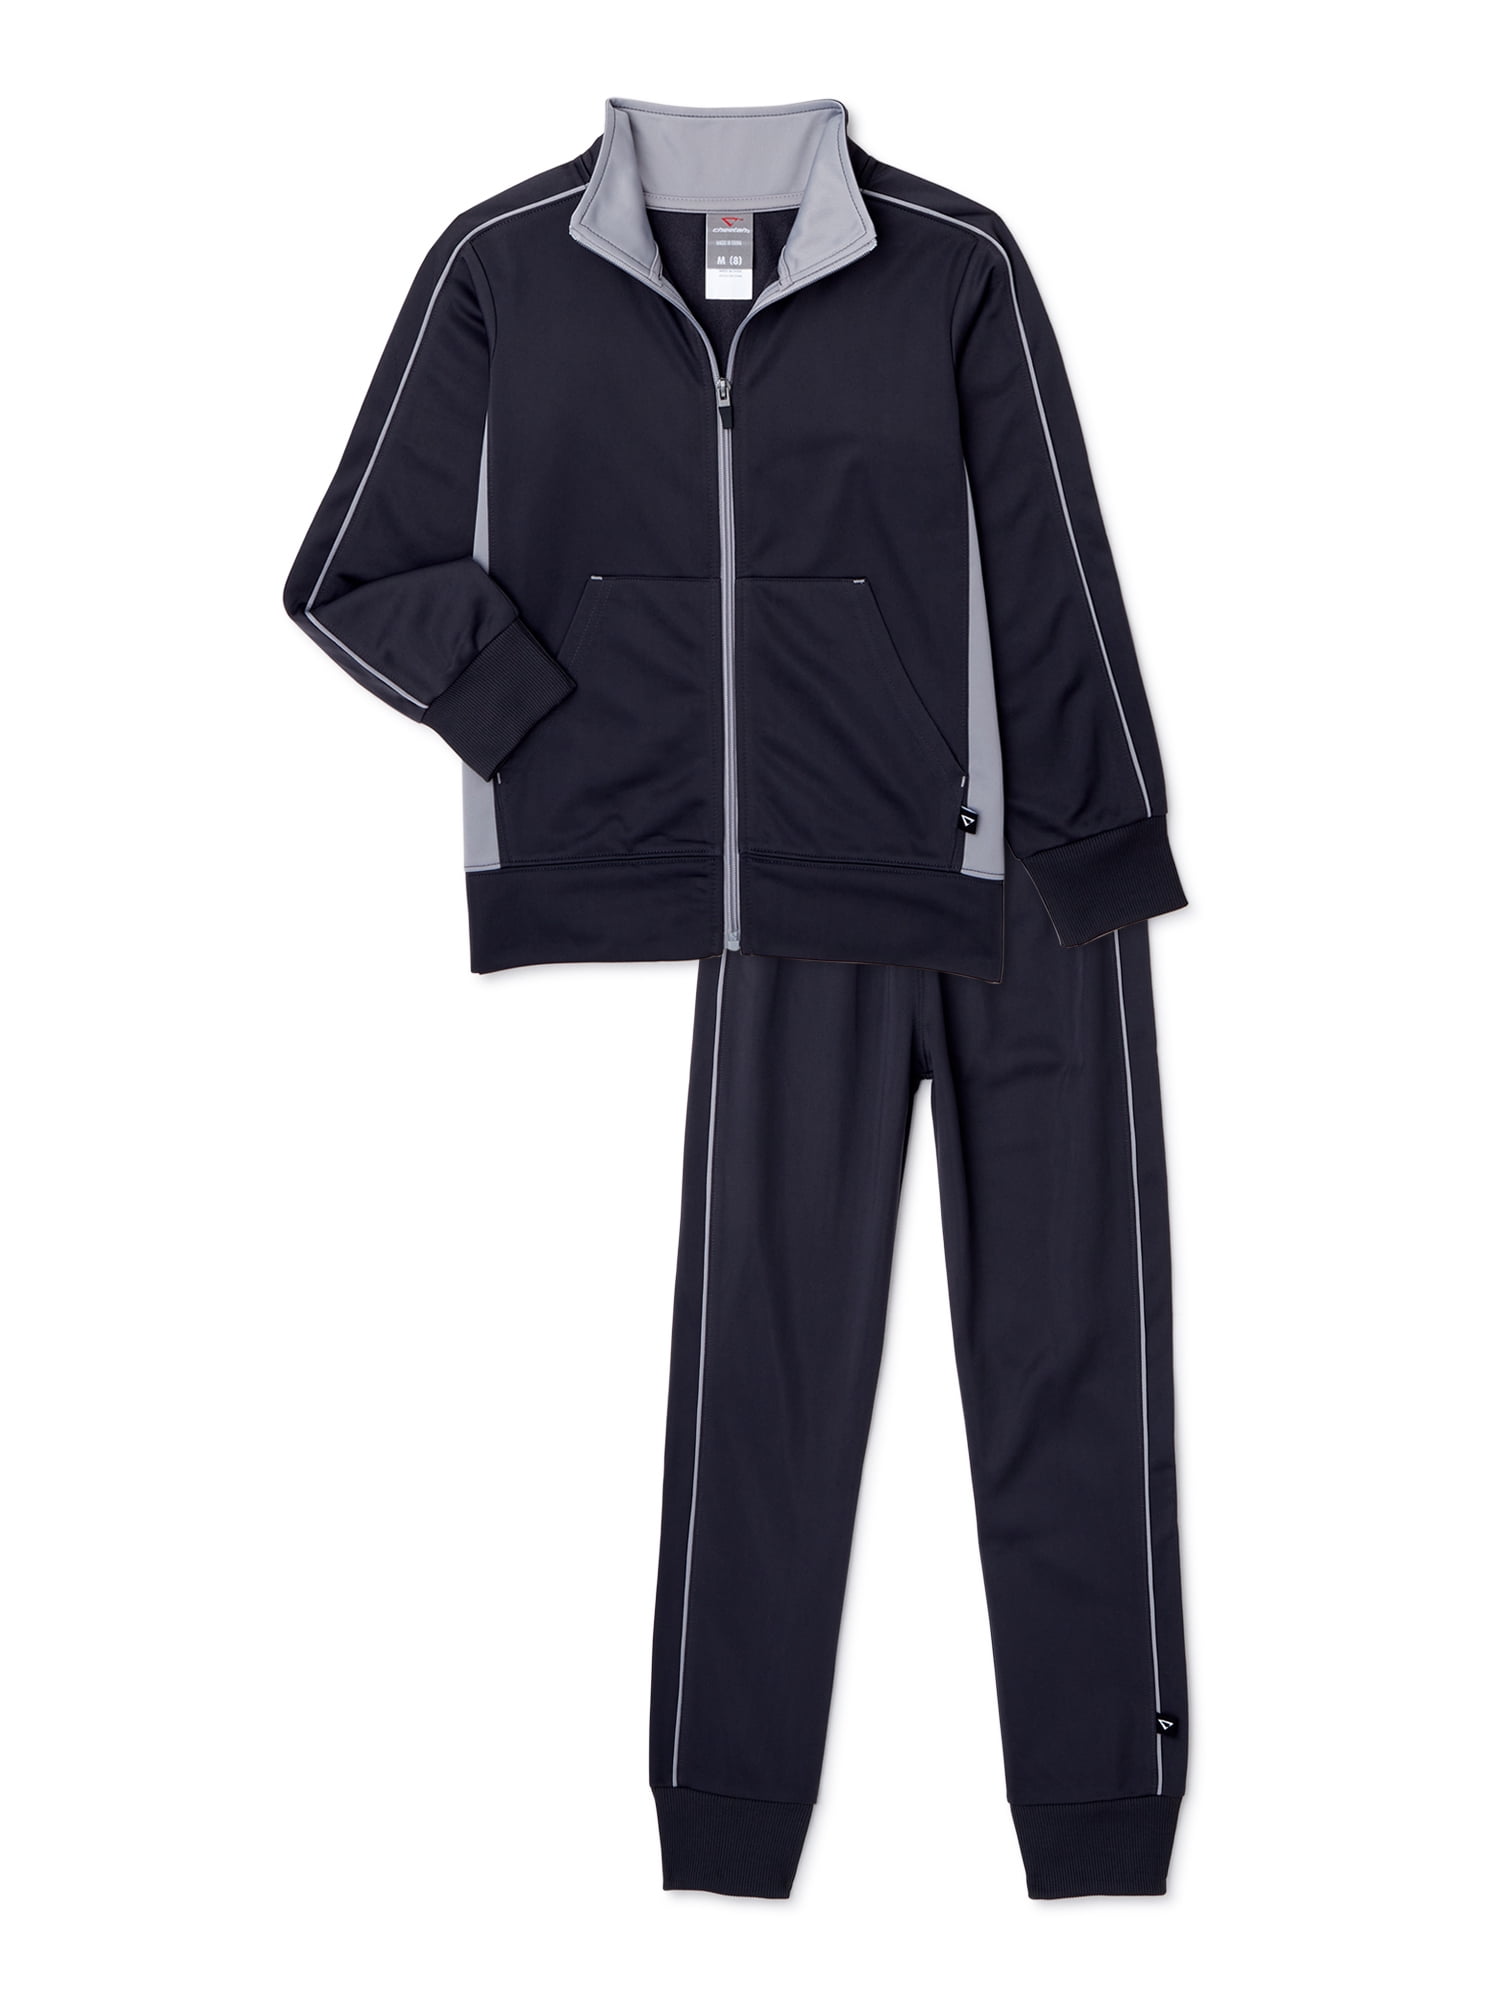 Cheetah Boys’ Tricot Performance Tracksuit, 2-Piece Outfit Set, Sizes 4 ...